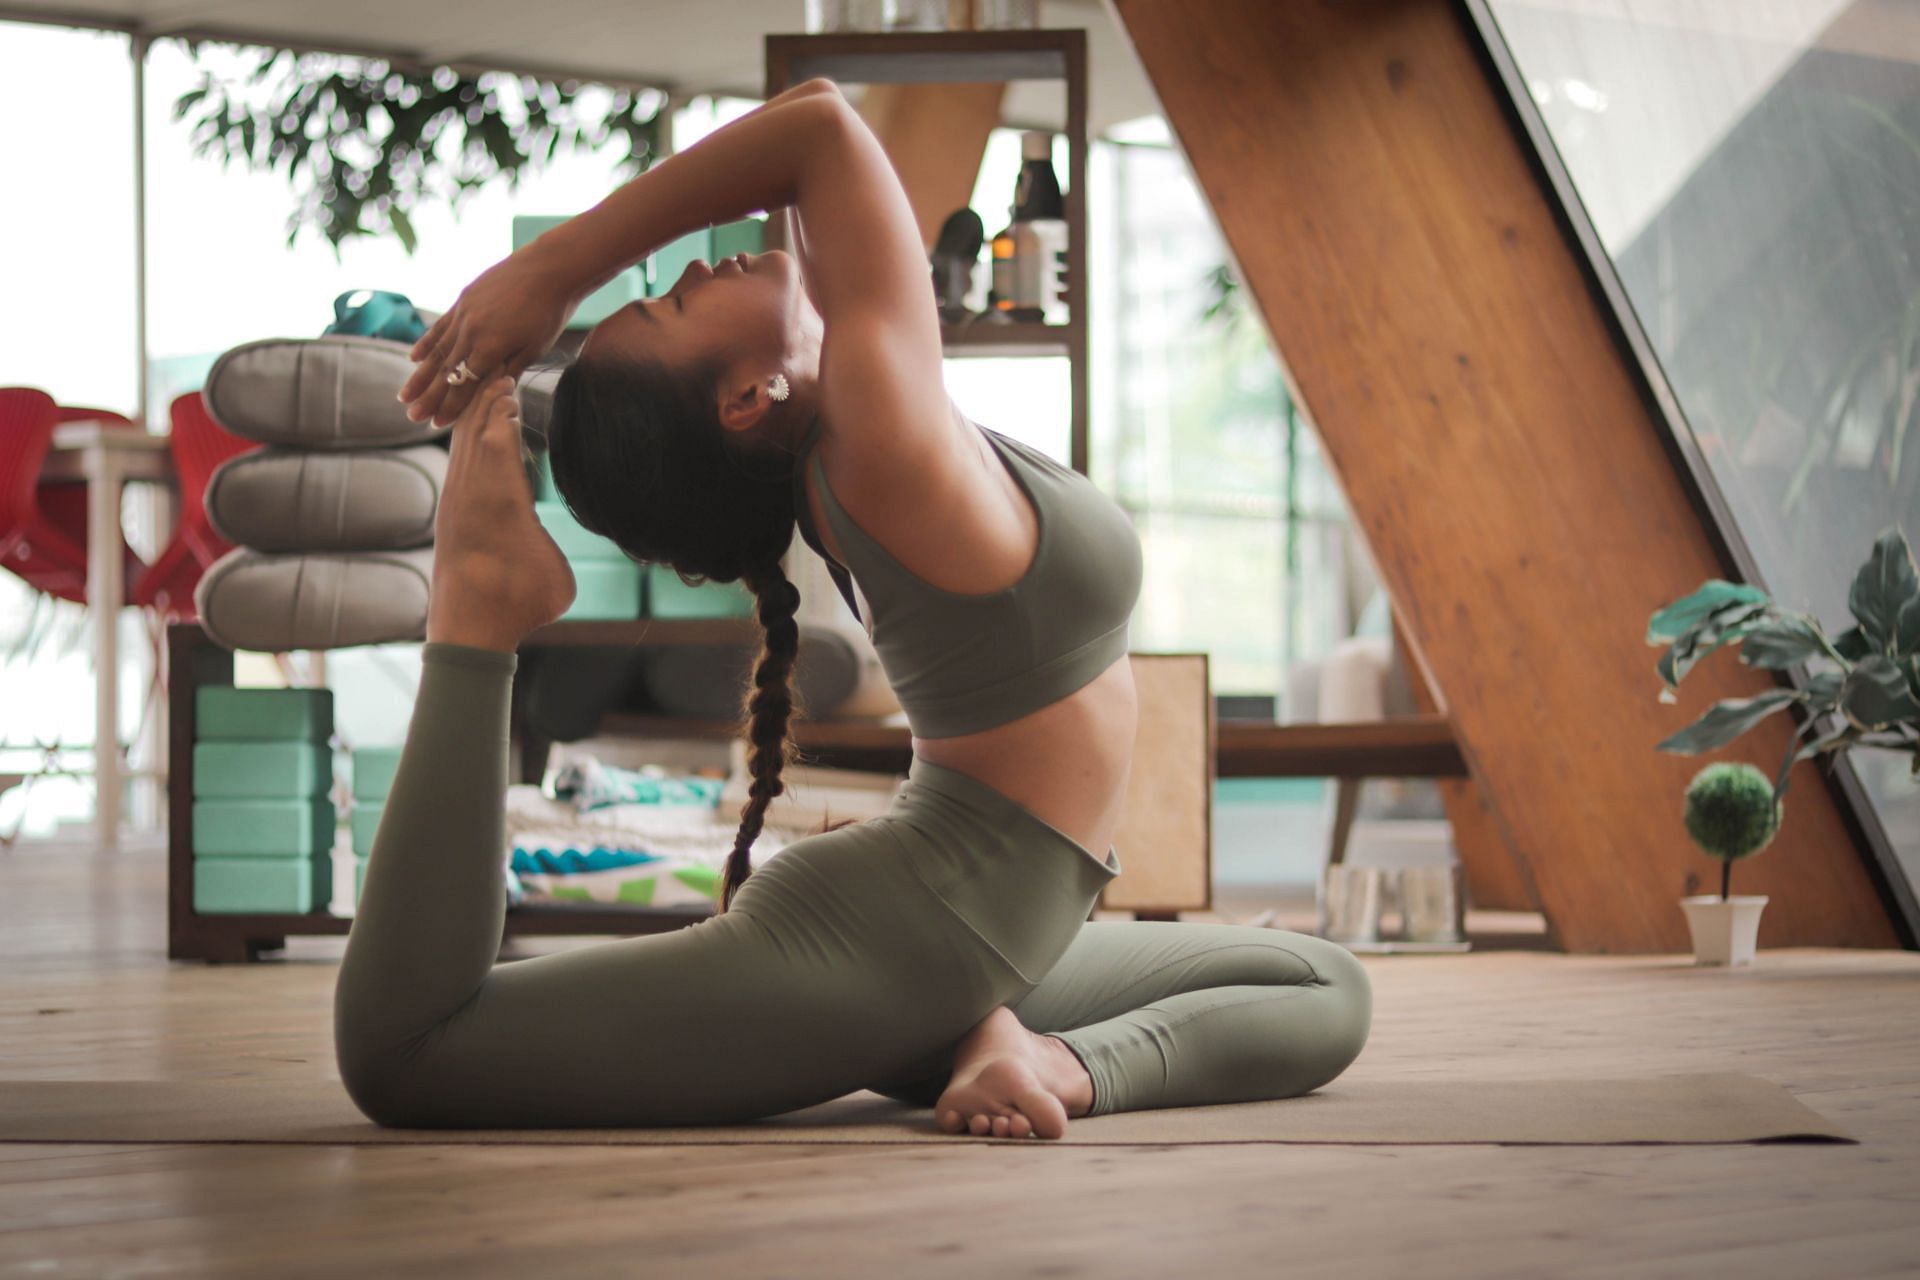 How long should you hold a yoga pose? Read on to find out. (Image via unsplash/Carl Barcelo)